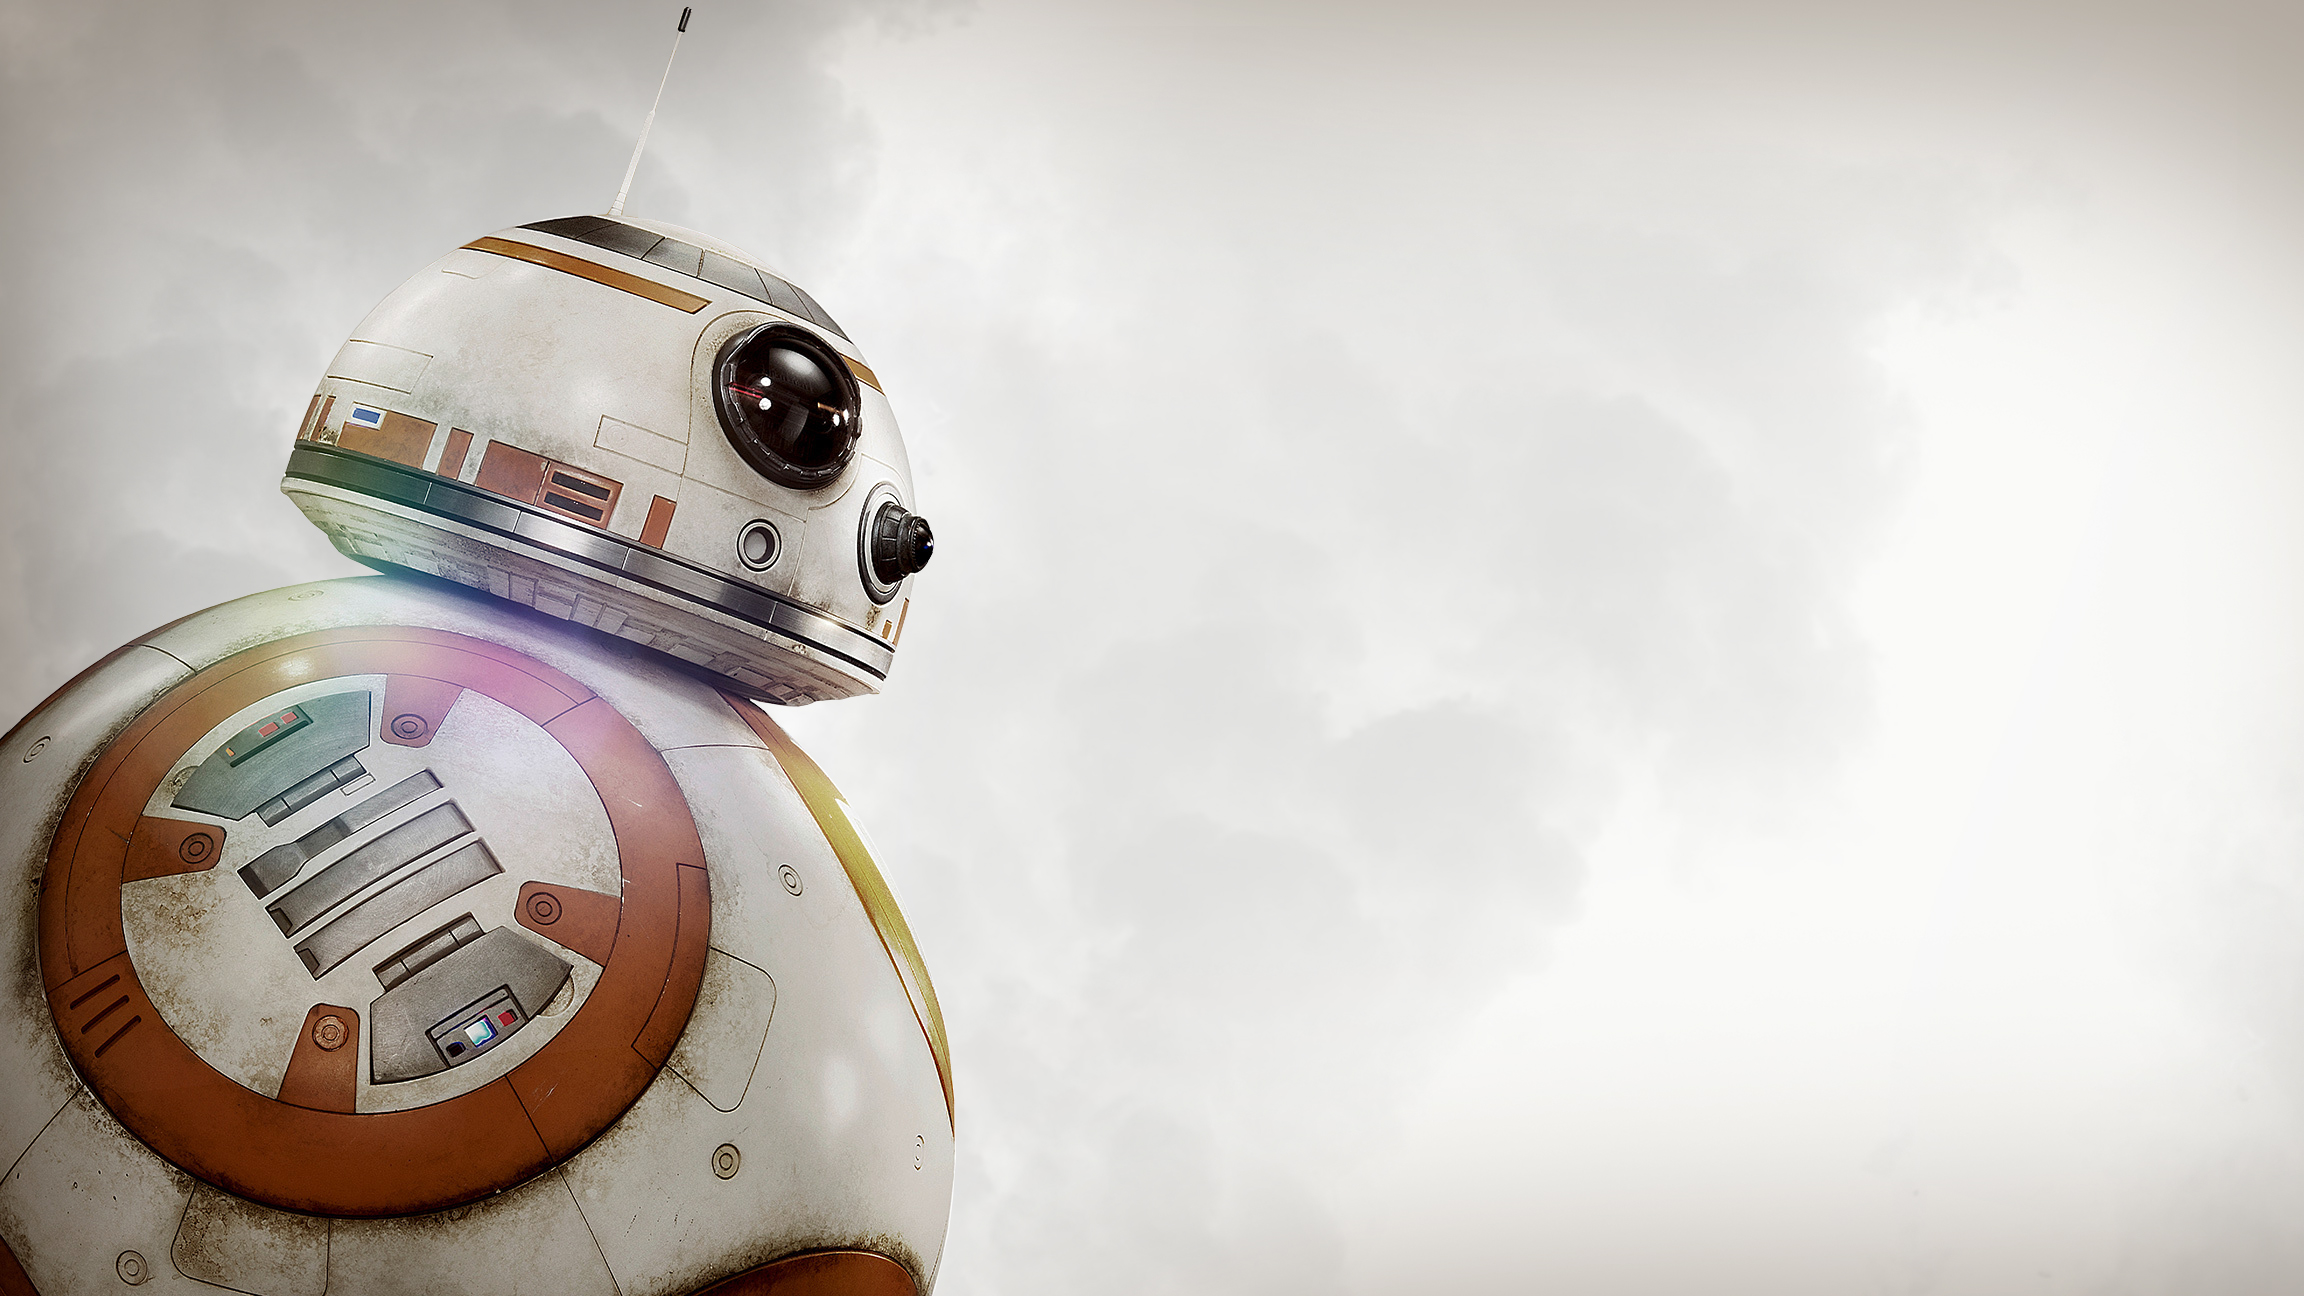 General 2304x1296 Star Wars BB-8 robot movies Star Wars: The Force Awakens science fiction digital art simple background